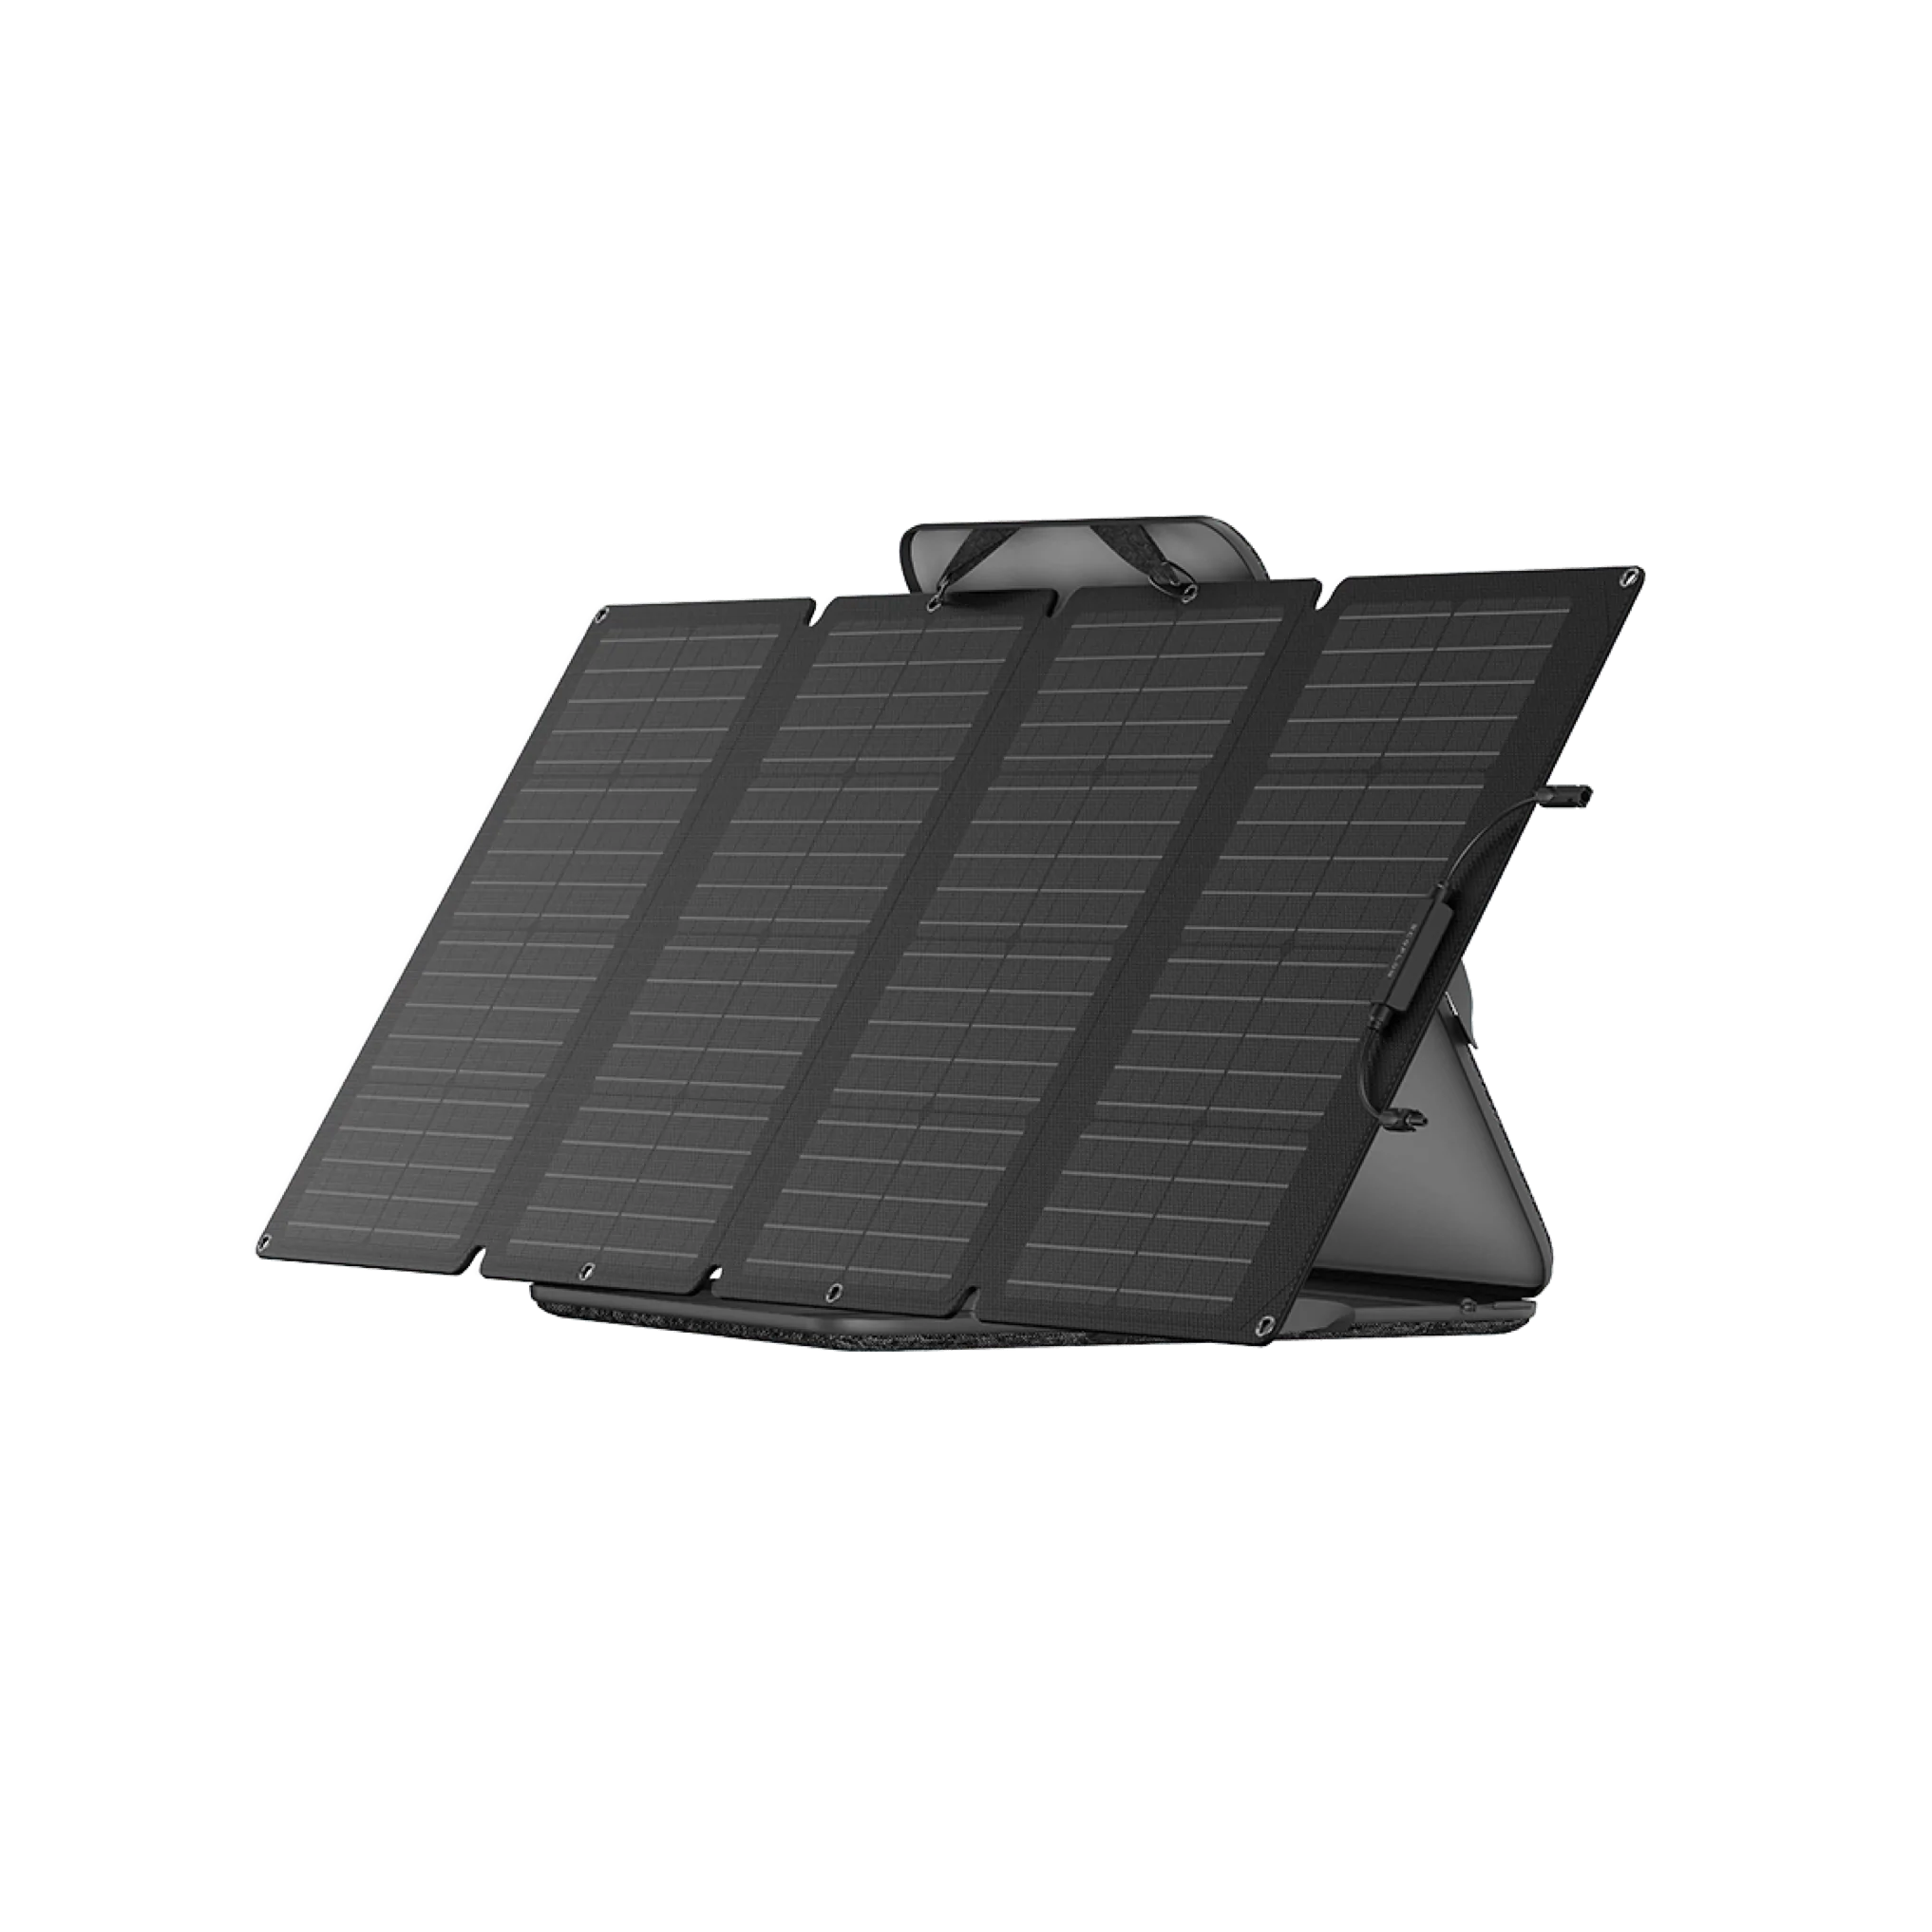 A portable black solar panel by EcoFlow, featuring 160W monocrystalline technology, on a white background.